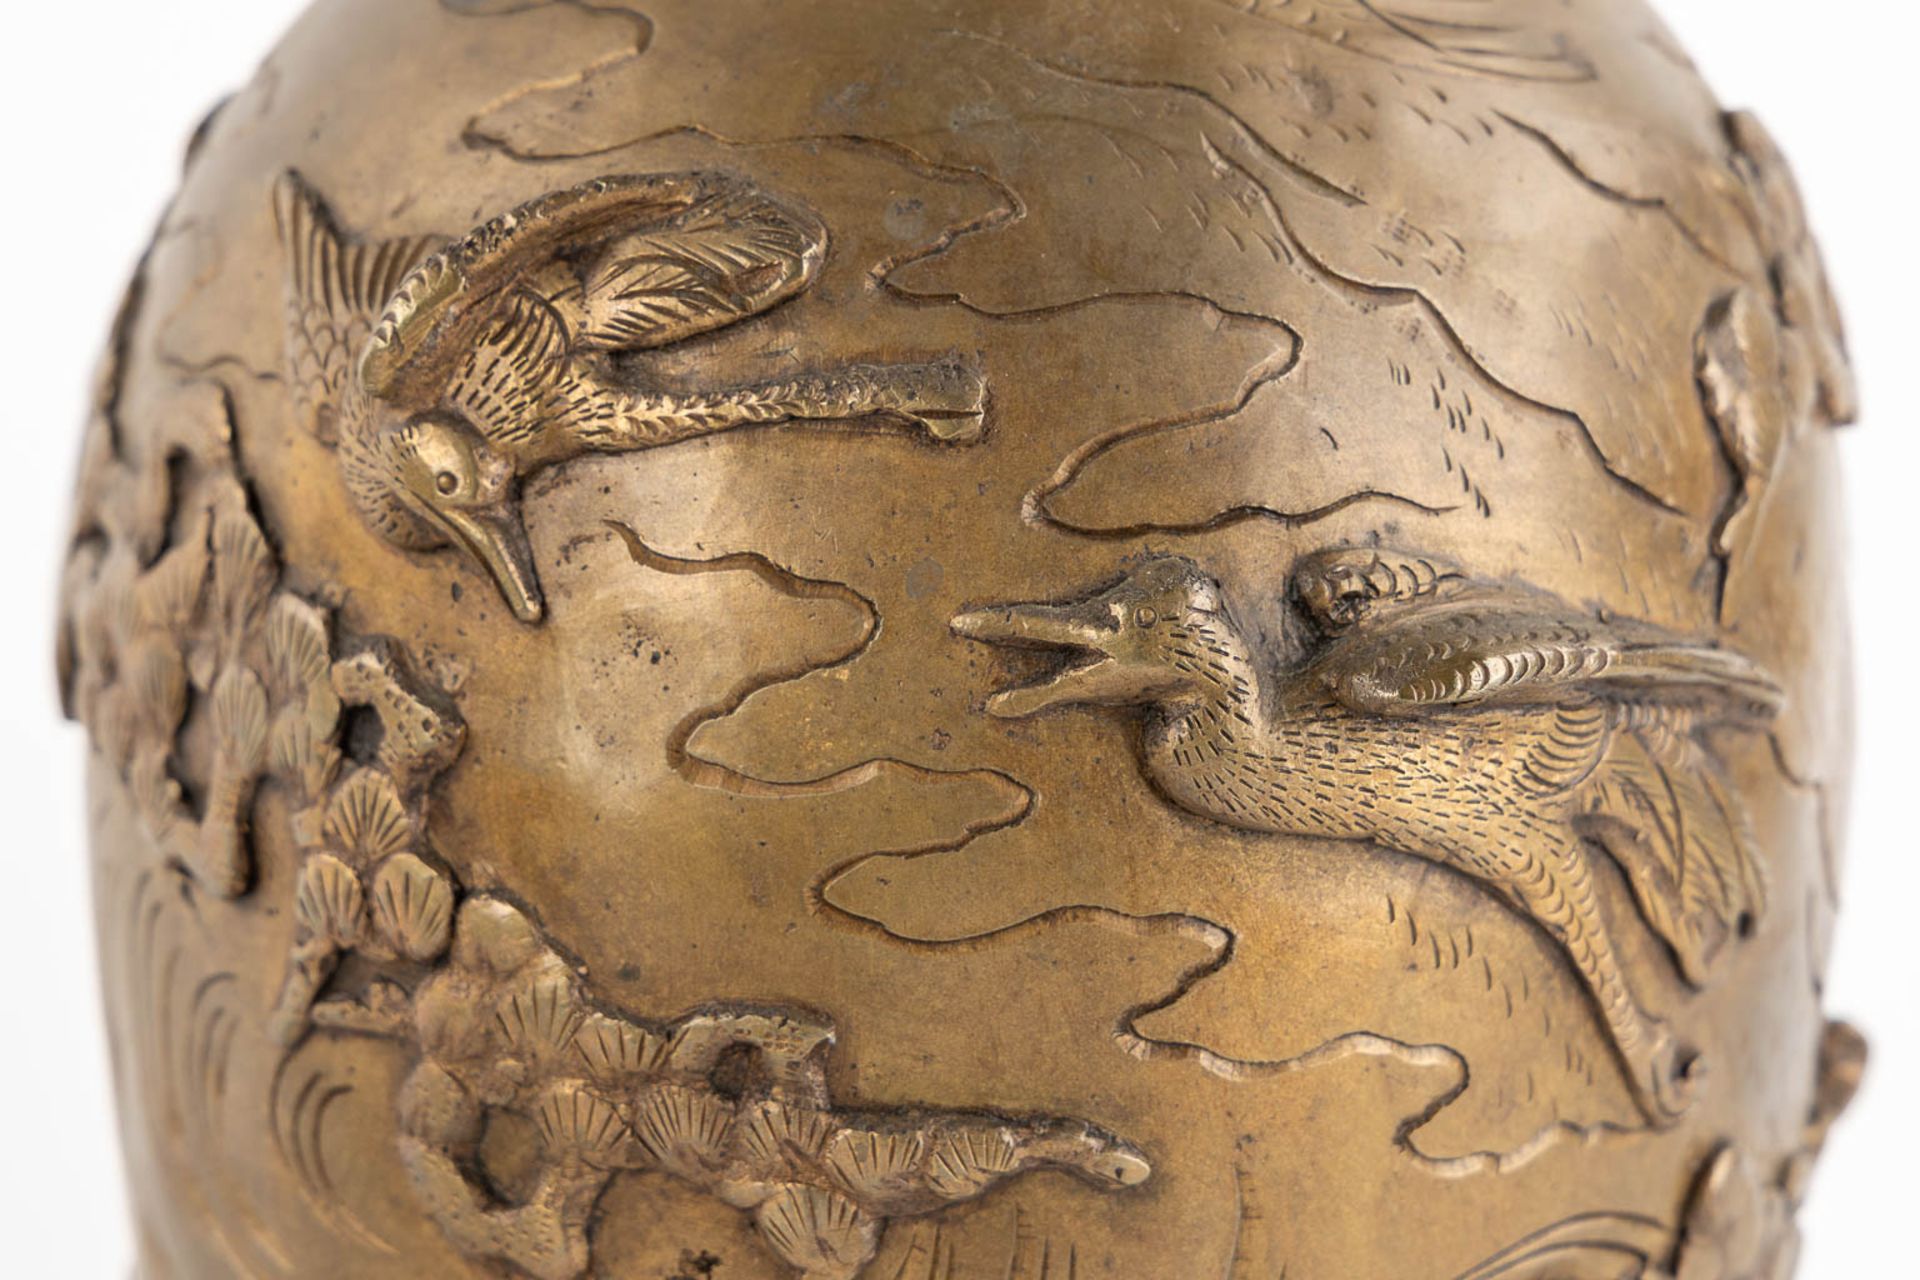 A pair of Oriental vases, depicting flying birds and trees. Patinated bronze. (H:27 x D:16 cm) - Image 12 of 16